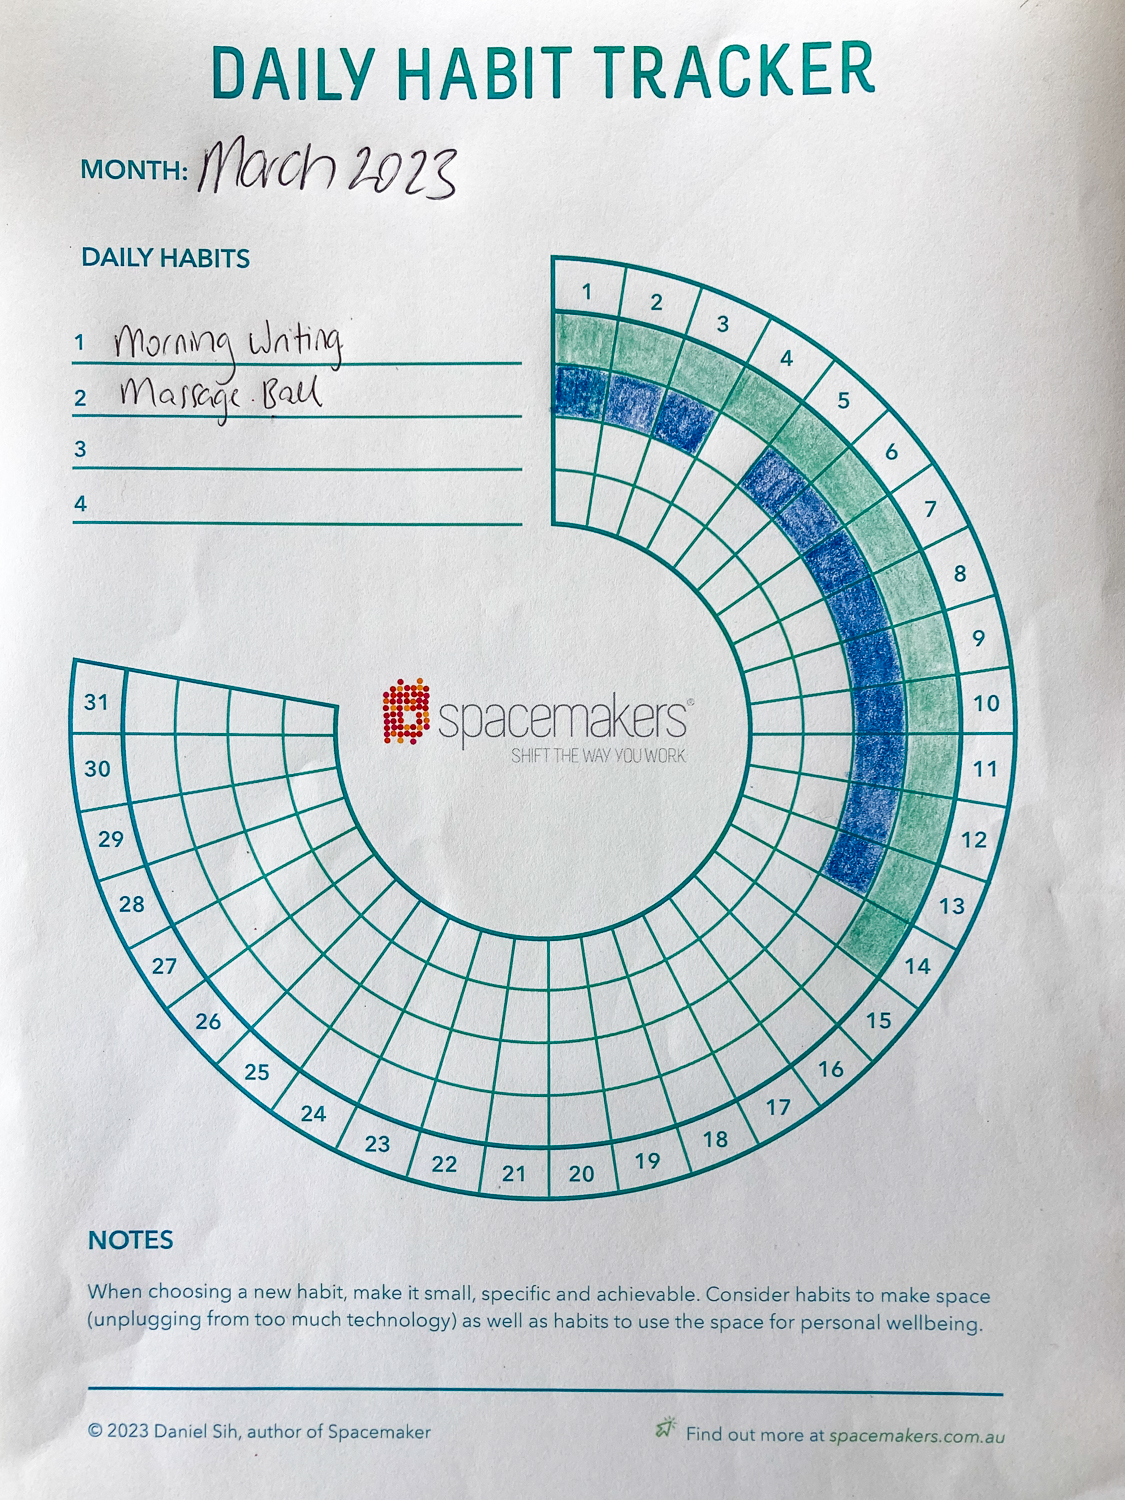 A circular habit tracker with four rows of 31 boxes, two labelled "morning writing" and "massage ball" and days coloured in up to 14